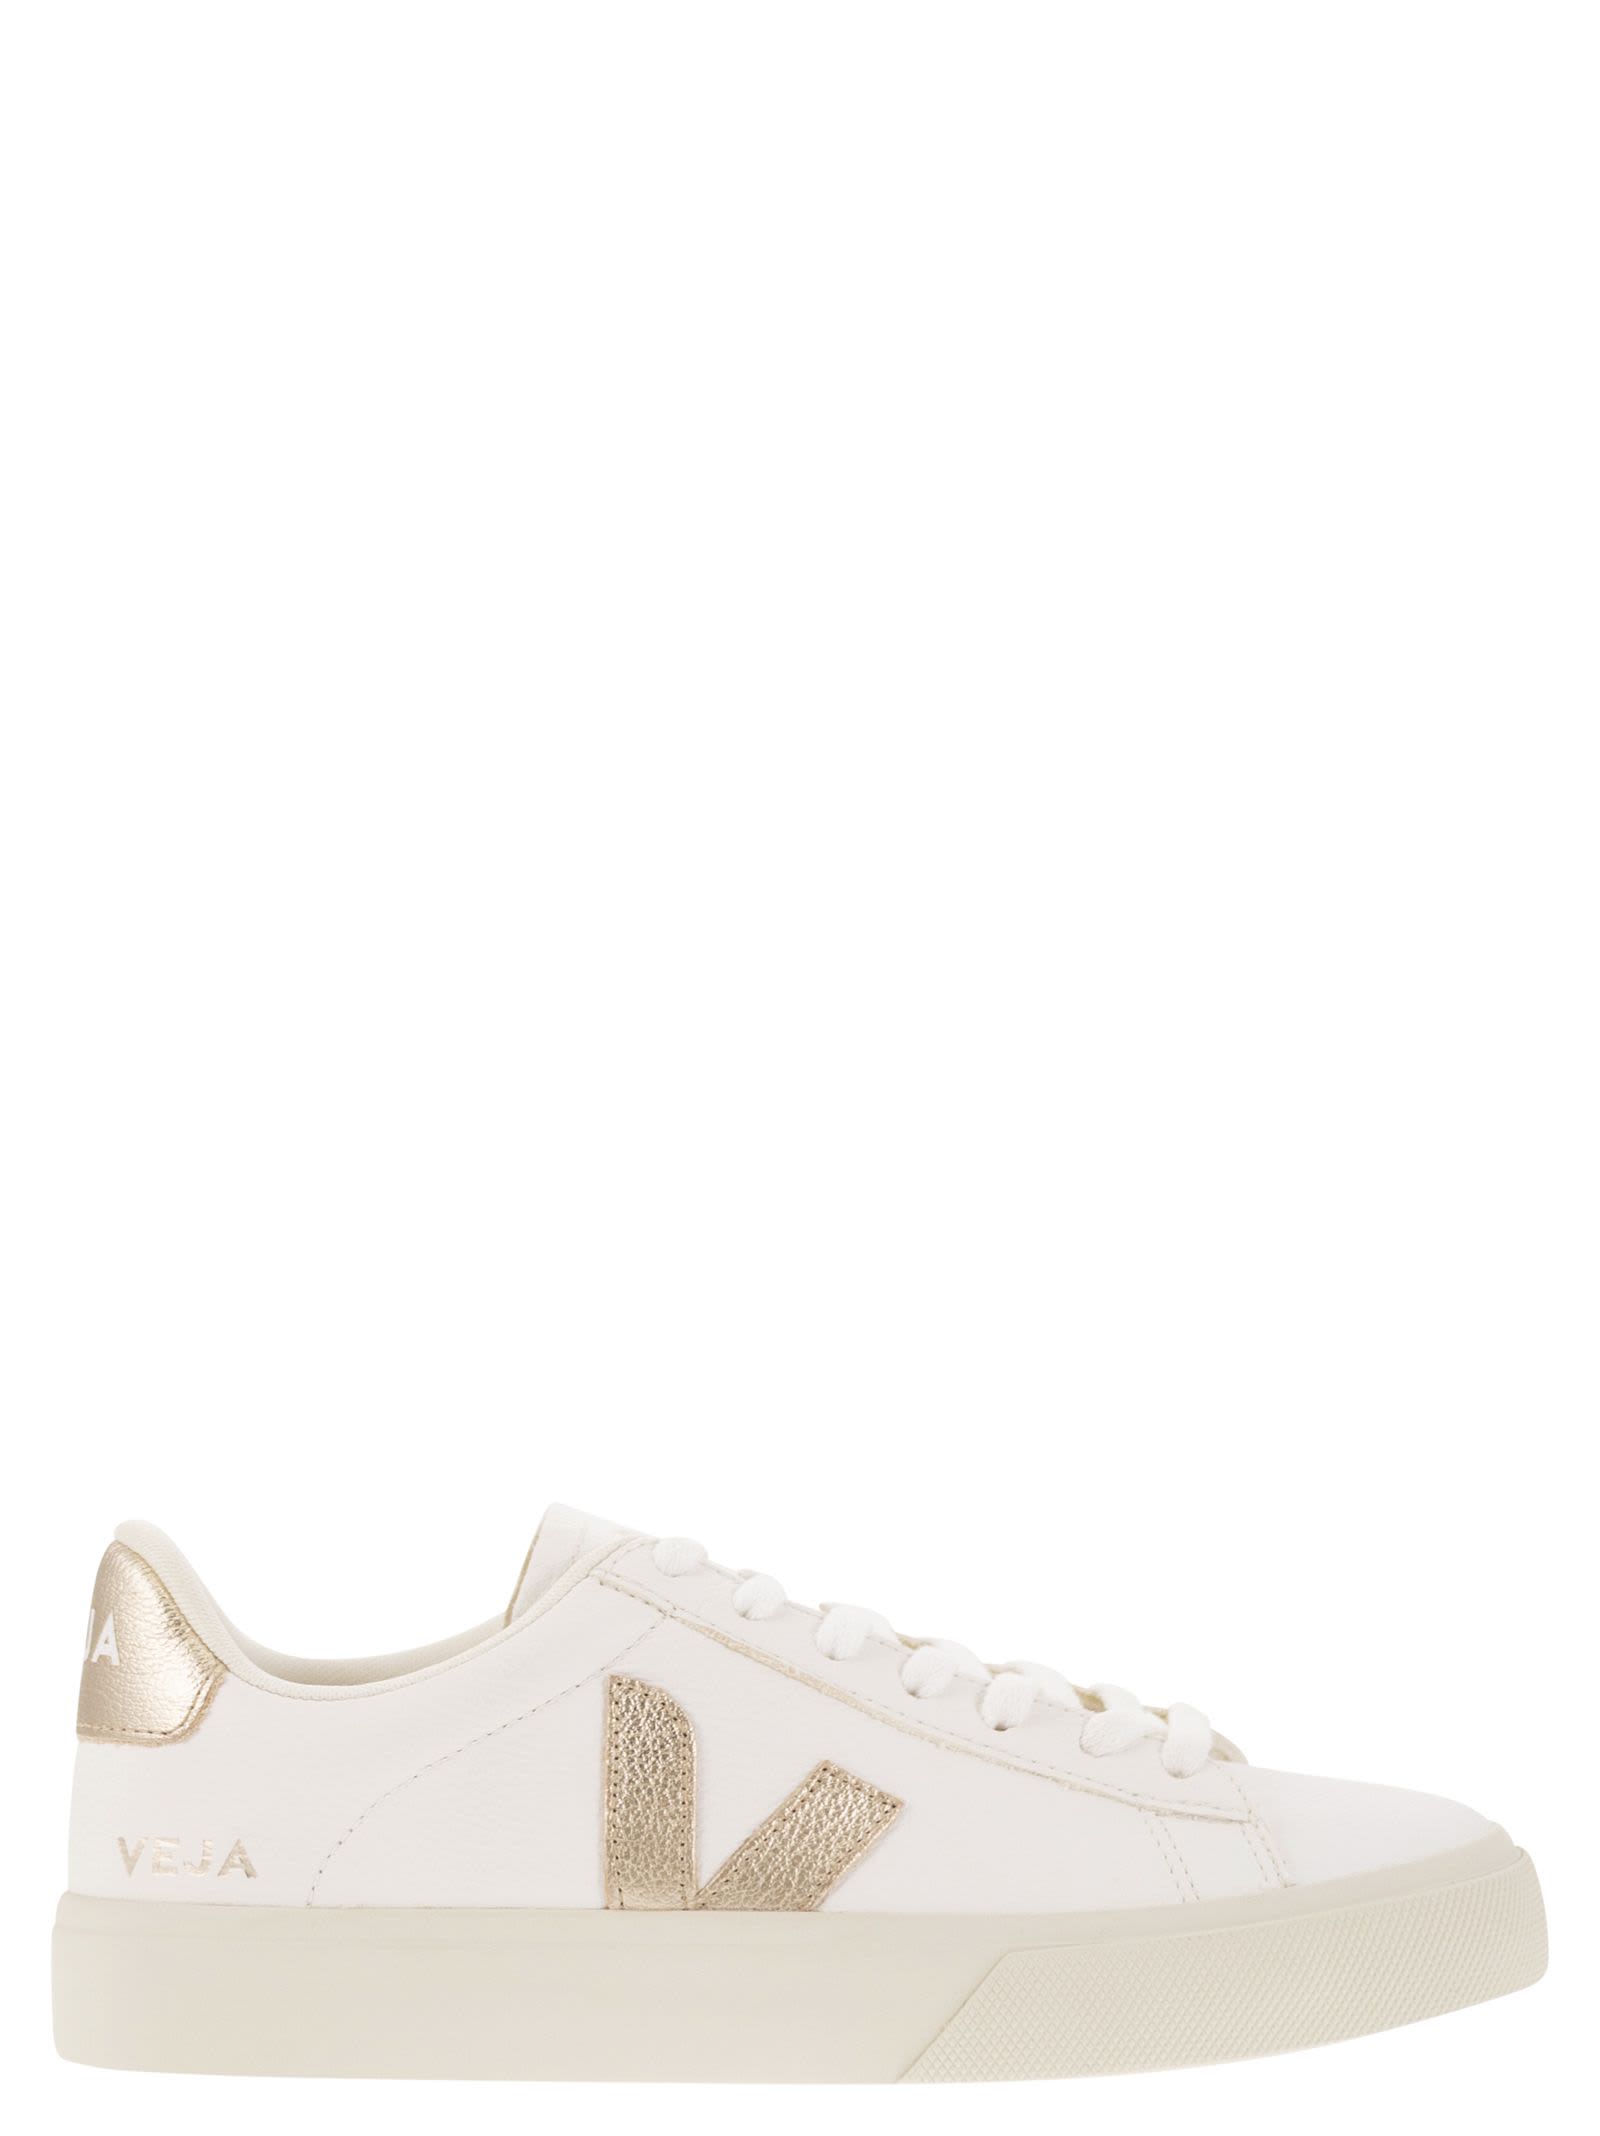 Veja Chromefree Leather Trainers In White/gold